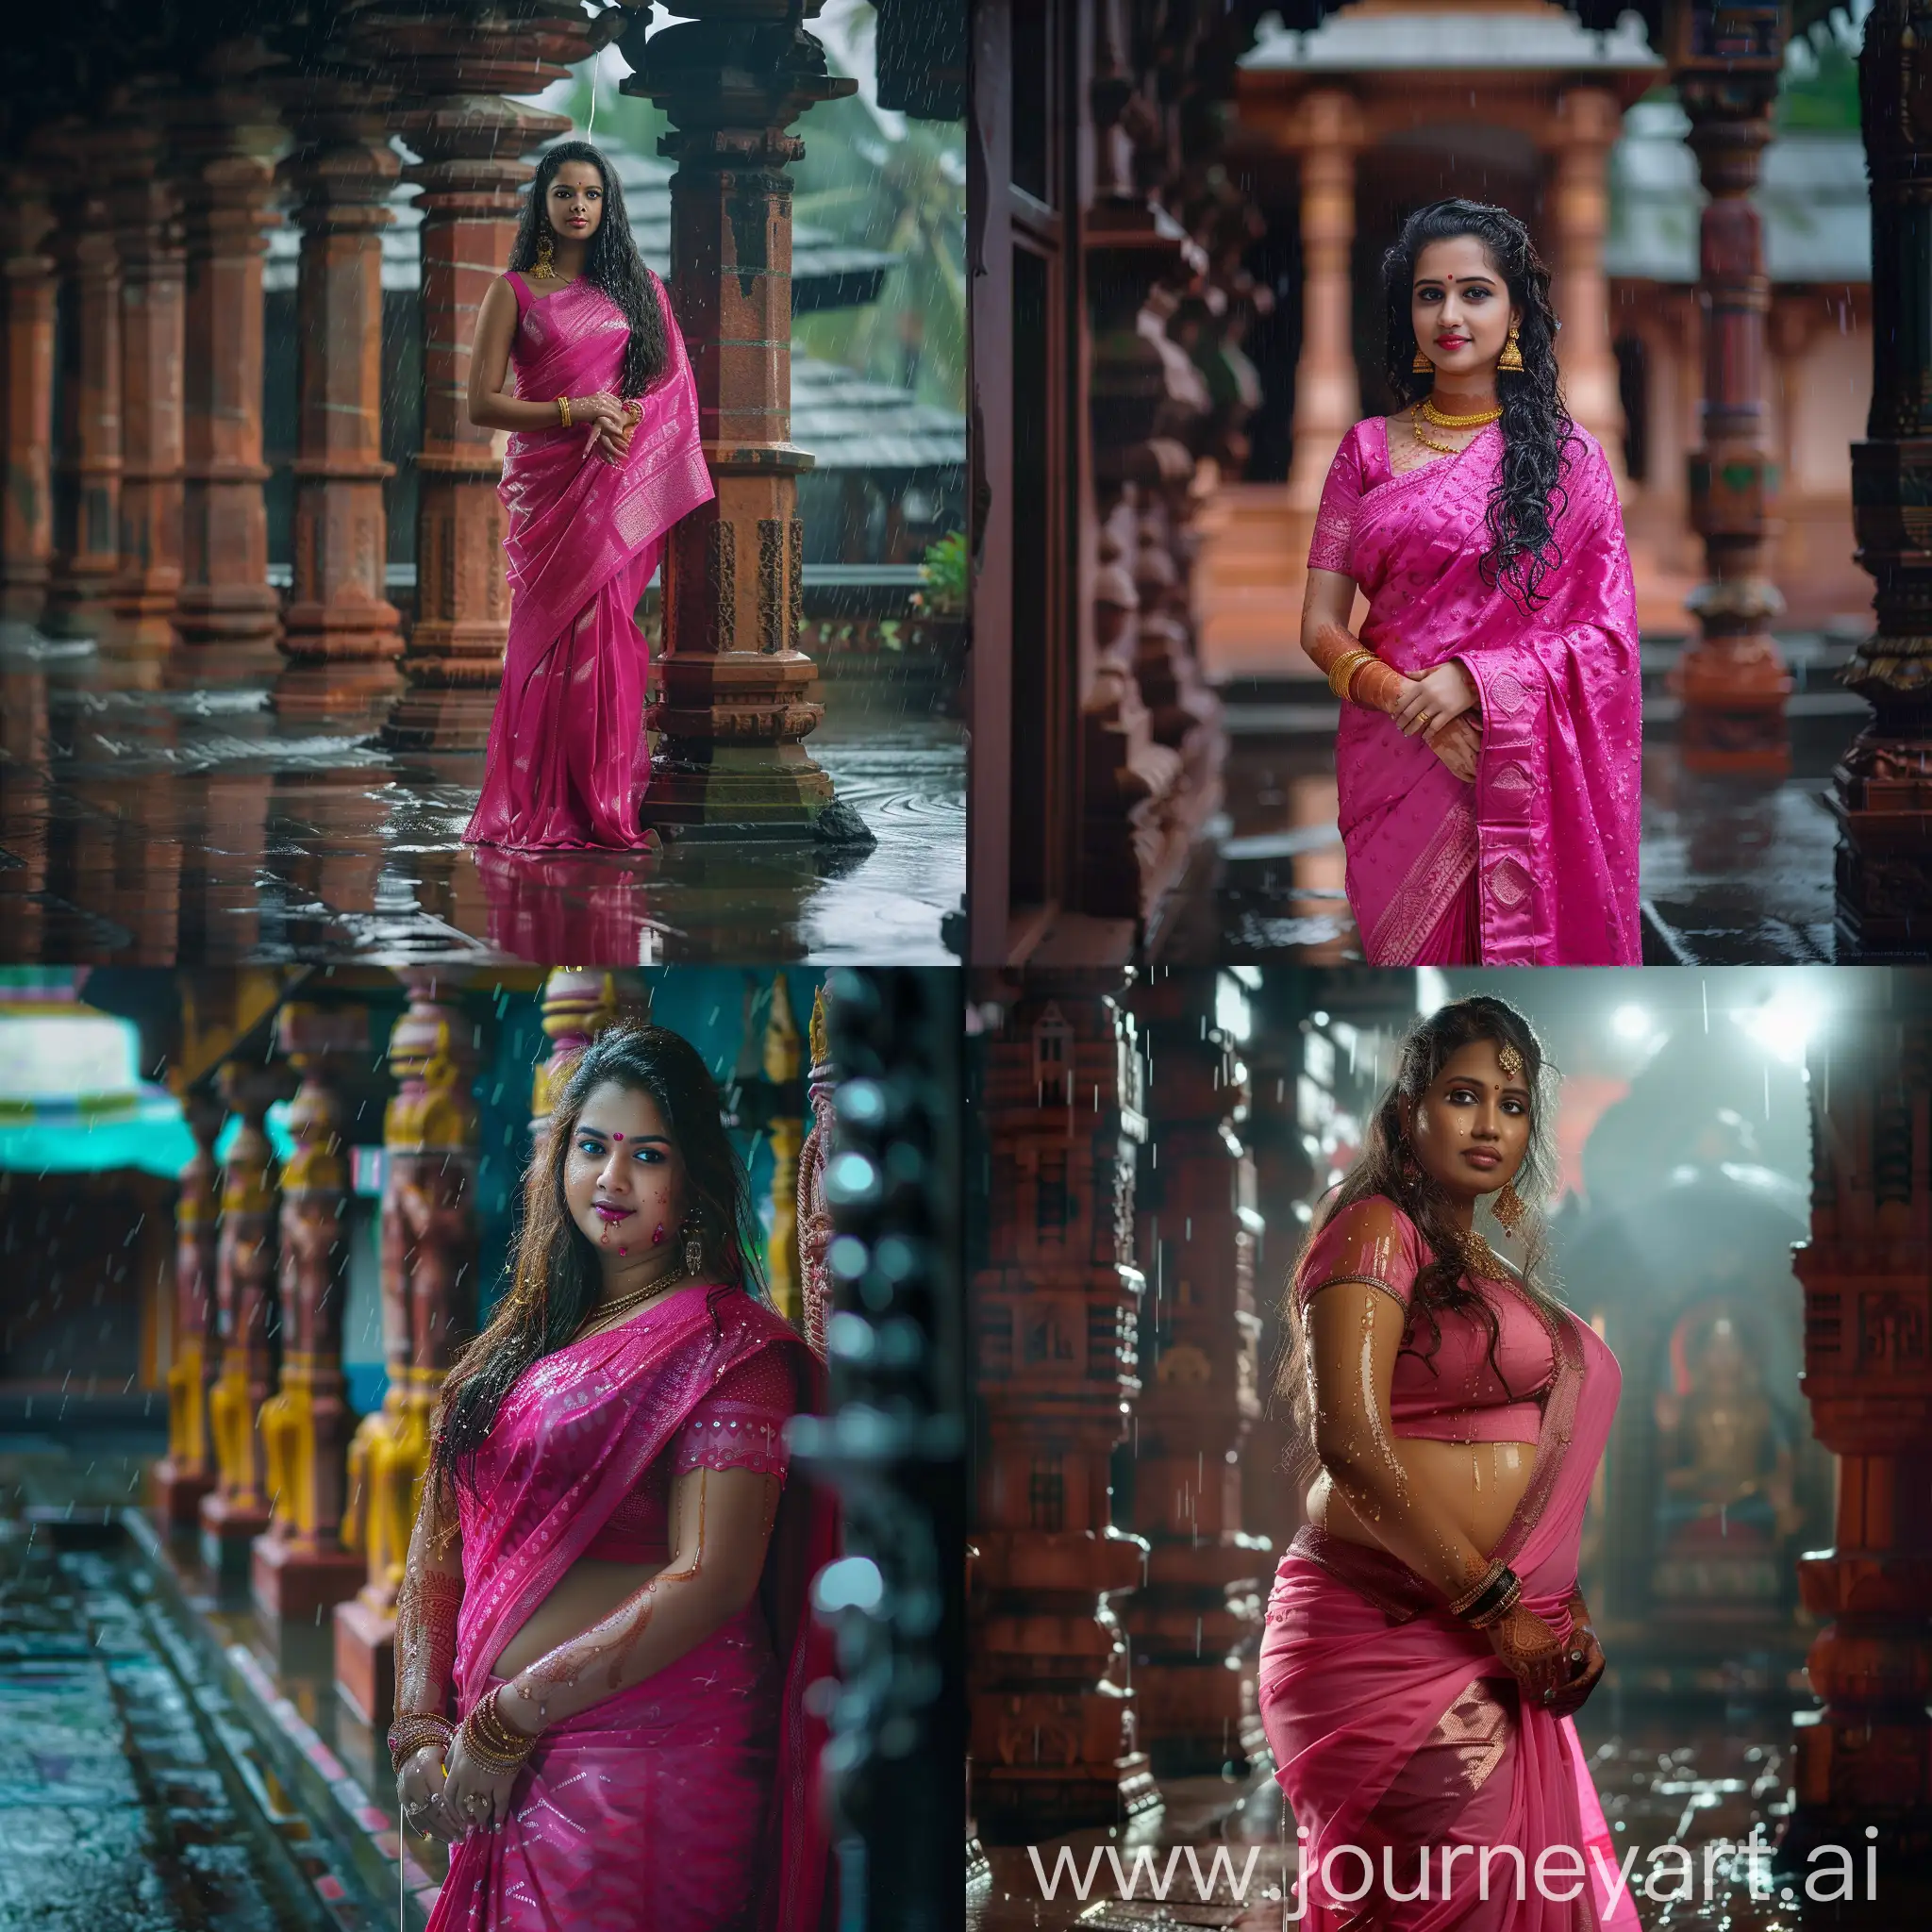 Stunning-Tamil-Girl-in-Pink-Saree-Rainy-Day-Temple-Portrait